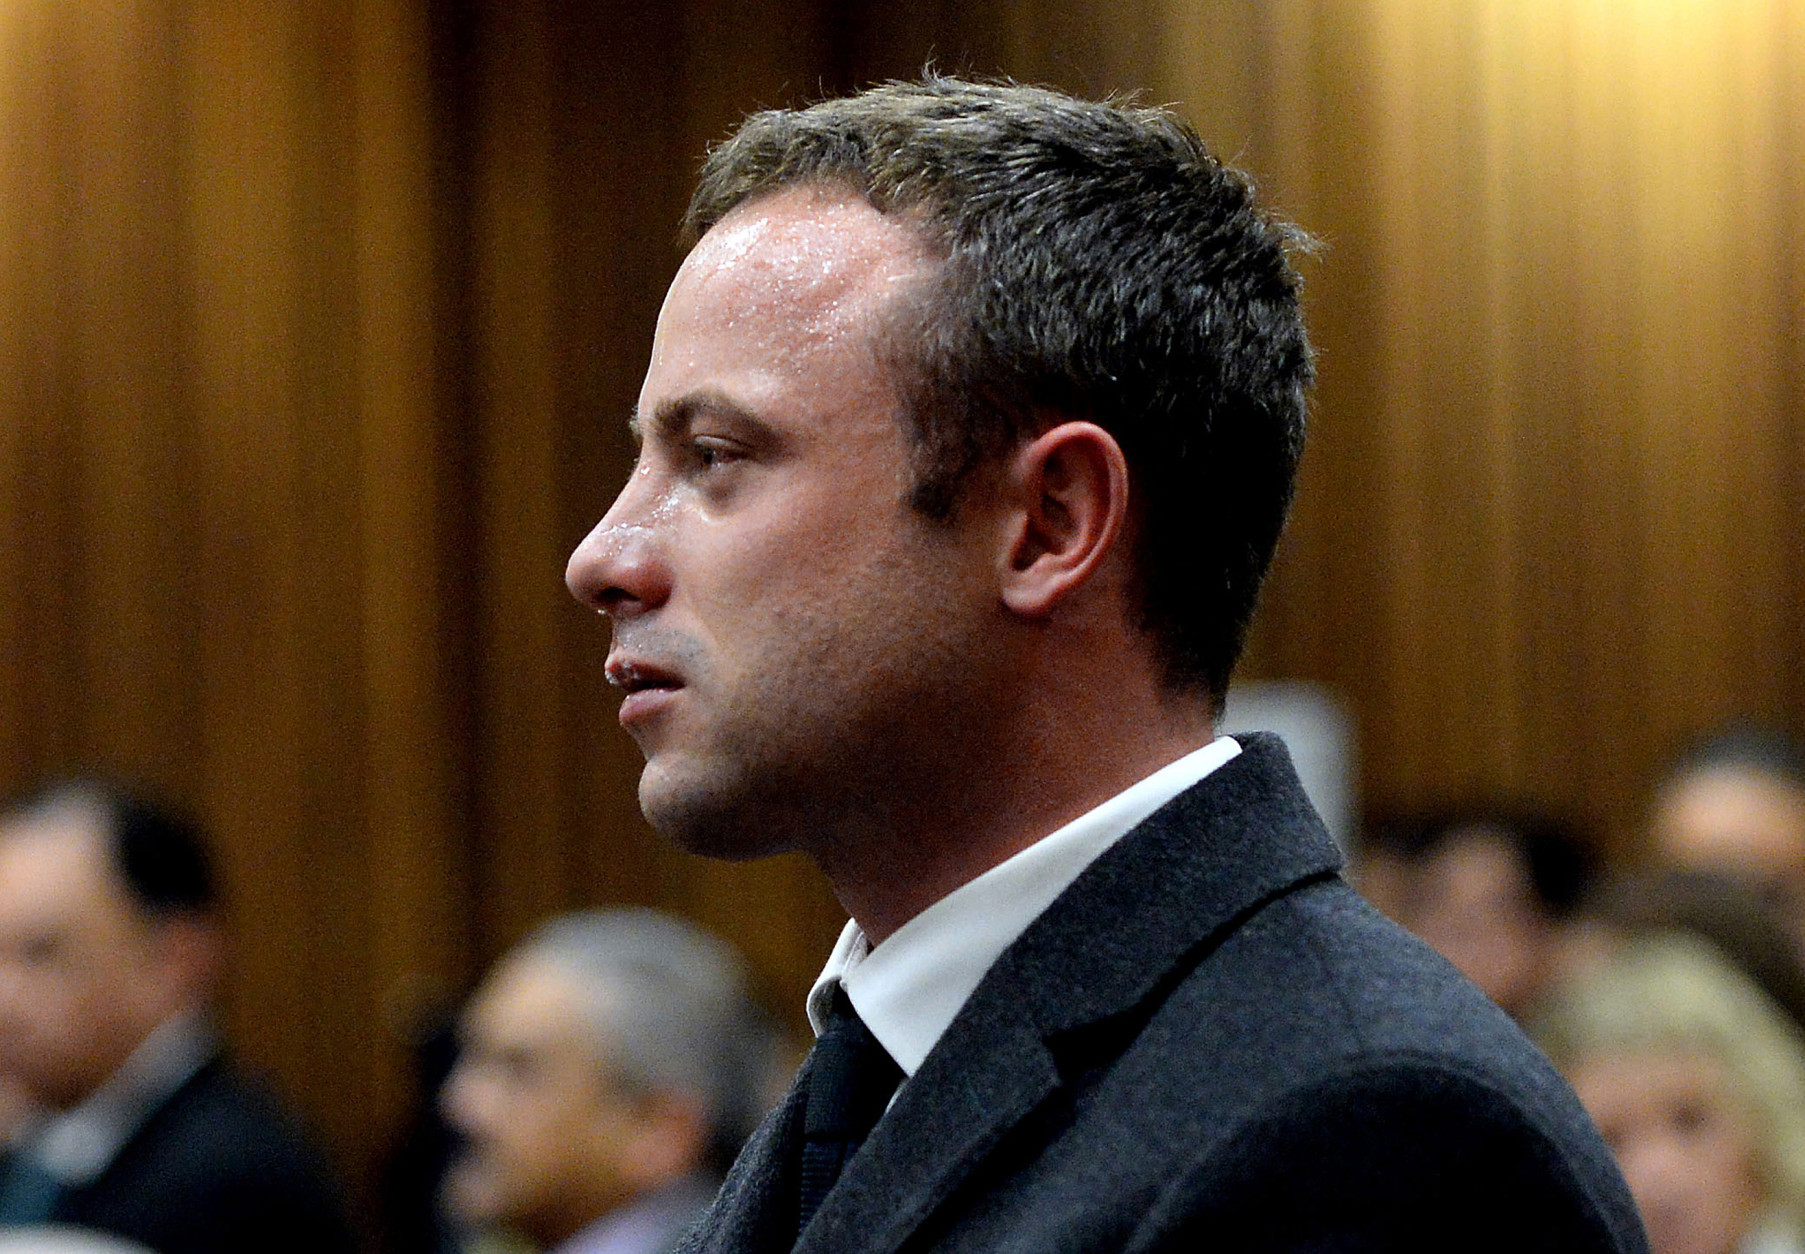 FOR USE AS DESIRED, YEAR END PHOTOS - FILE - In this photo taken Monday March 10, 2014, Oscar Pistorius cries as he listens to cross questioning about the events surrounding the shooting death of his girlfriend Reeva Steenkamp, in court during his trial in Pretoria, South Africa. Pistorius was charged with the shooting death of Steenkamp, on Valentines Day in 2013. (AP Photo/Bongiwe Mchunu, File Pool)